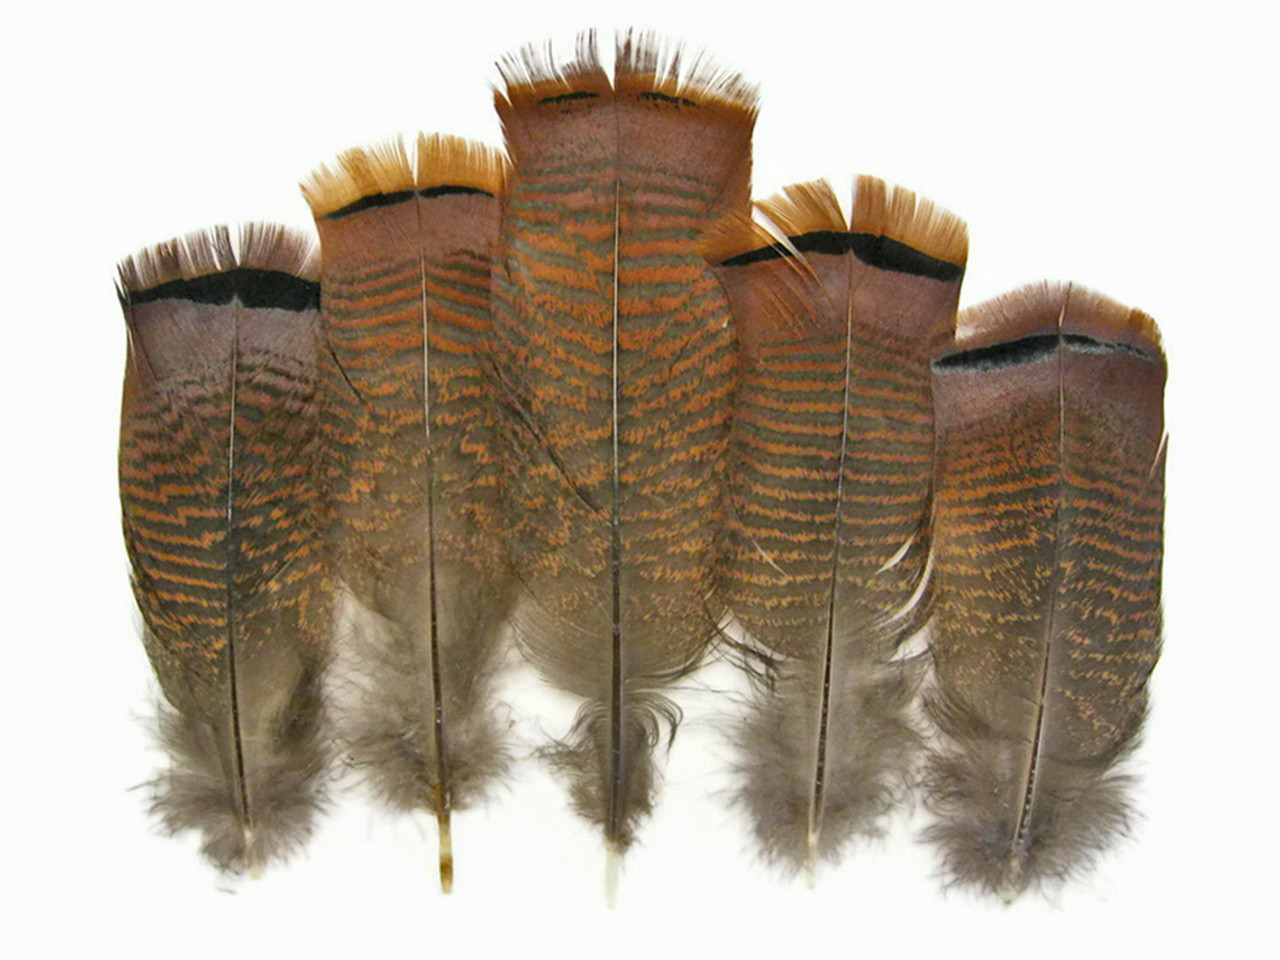 5 Pieces Red Wild Turkey Flats Feathers | Moonlight Feather